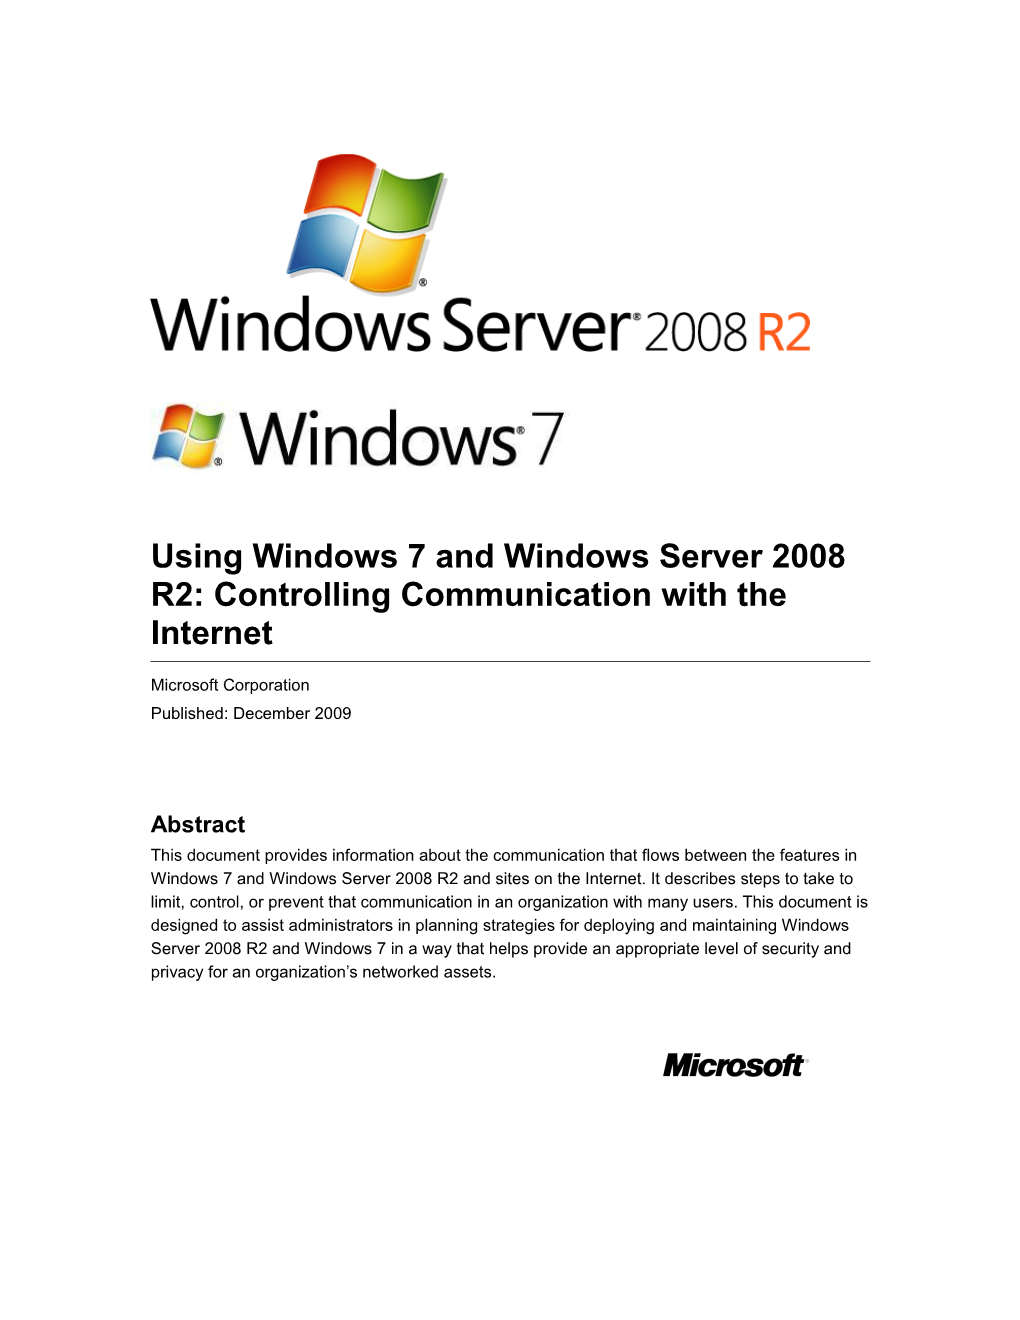 Using Windows 7 and Windows Server 2008 R2: Controlling Communication with the Internet